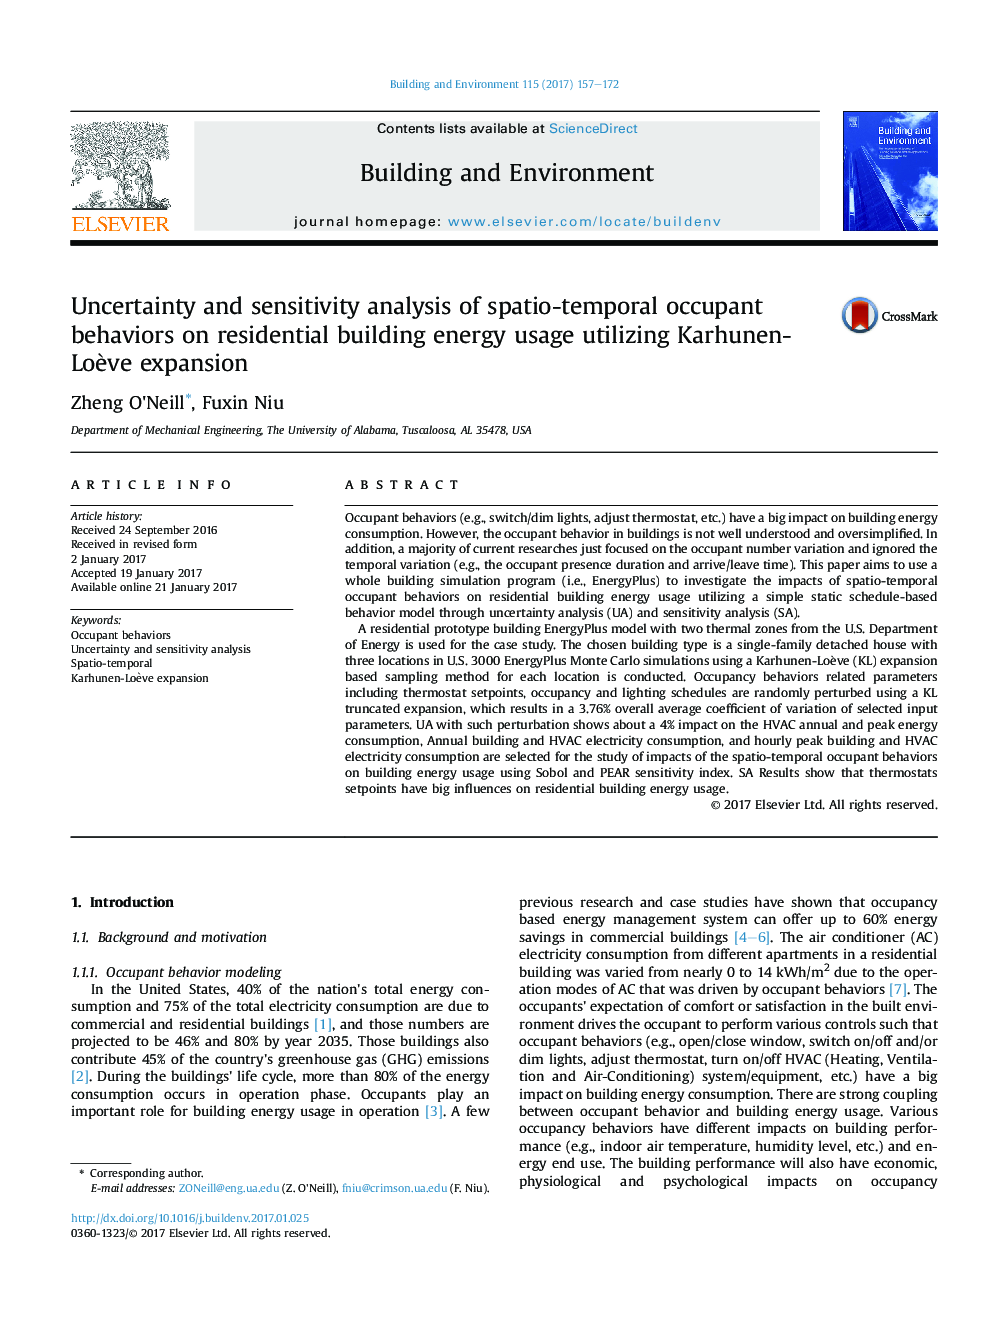 Uncertainty and sensitivity analysis of spatio-temporal occupant behaviors on residential building energy usage utilizing Karhunen-LoÃ¨ve expansion